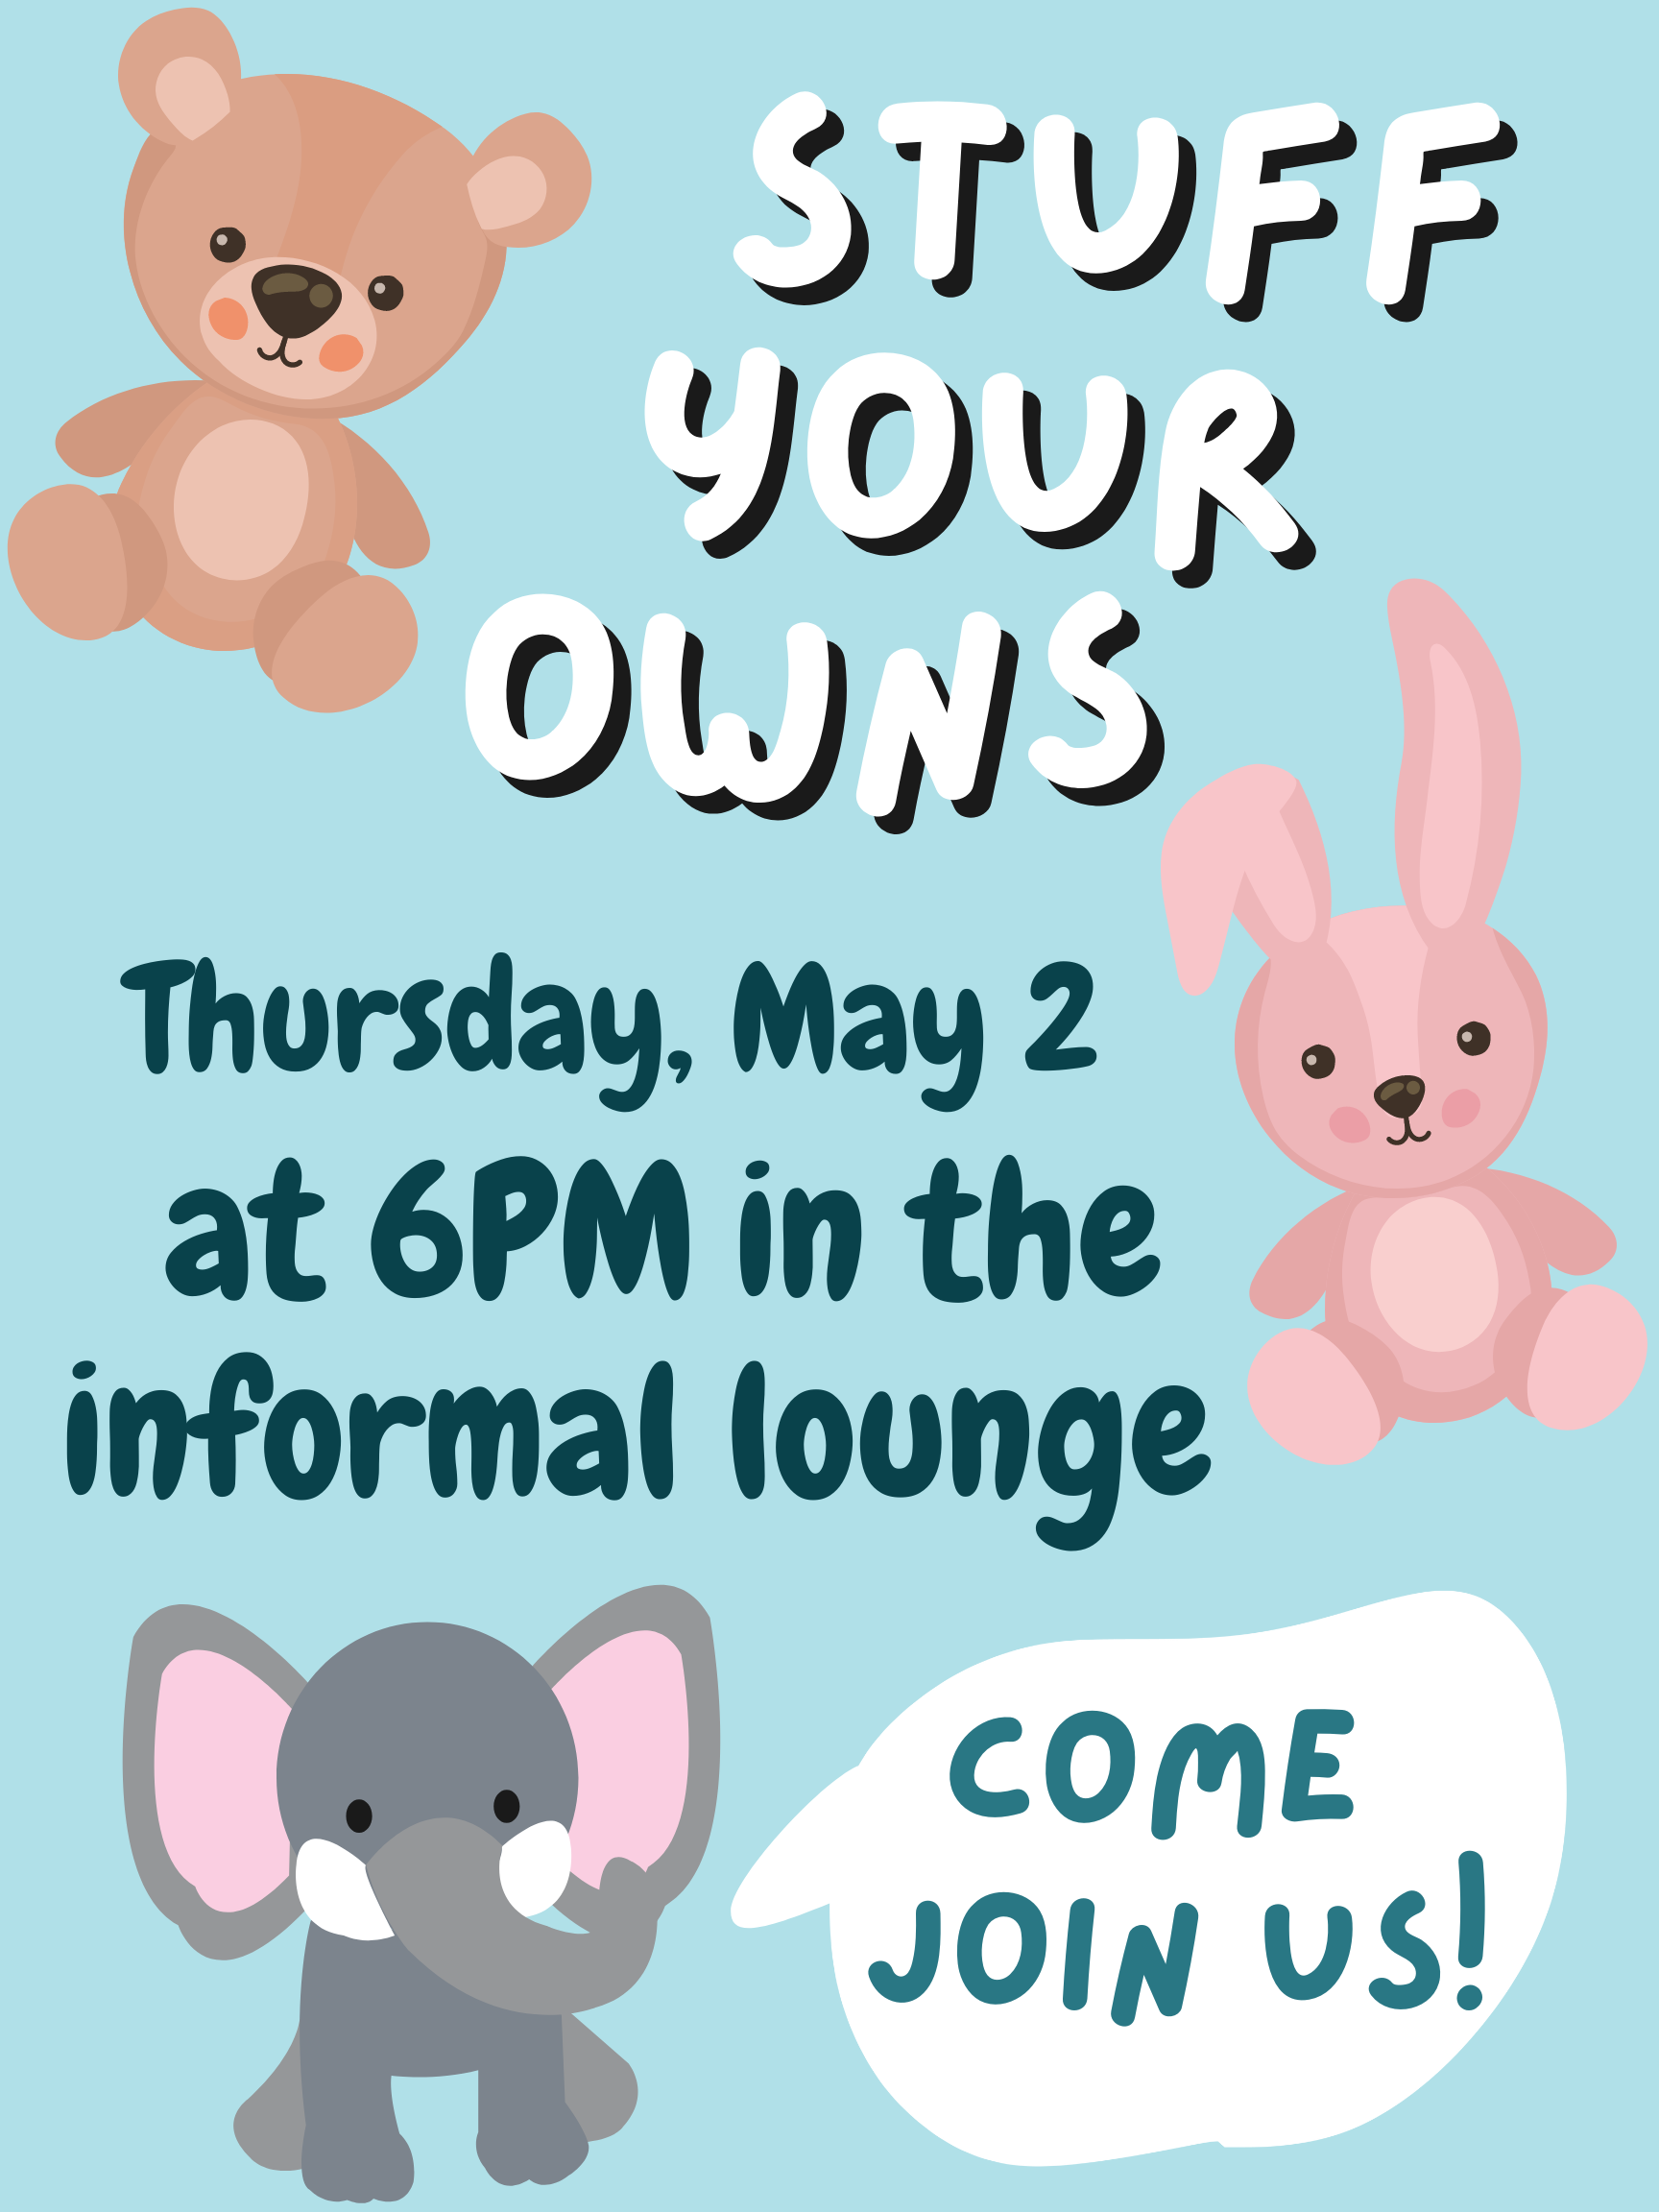 Stuff Your Owns!

Thursday, May 2nd

6 pm | Campus Center Formal Lounge